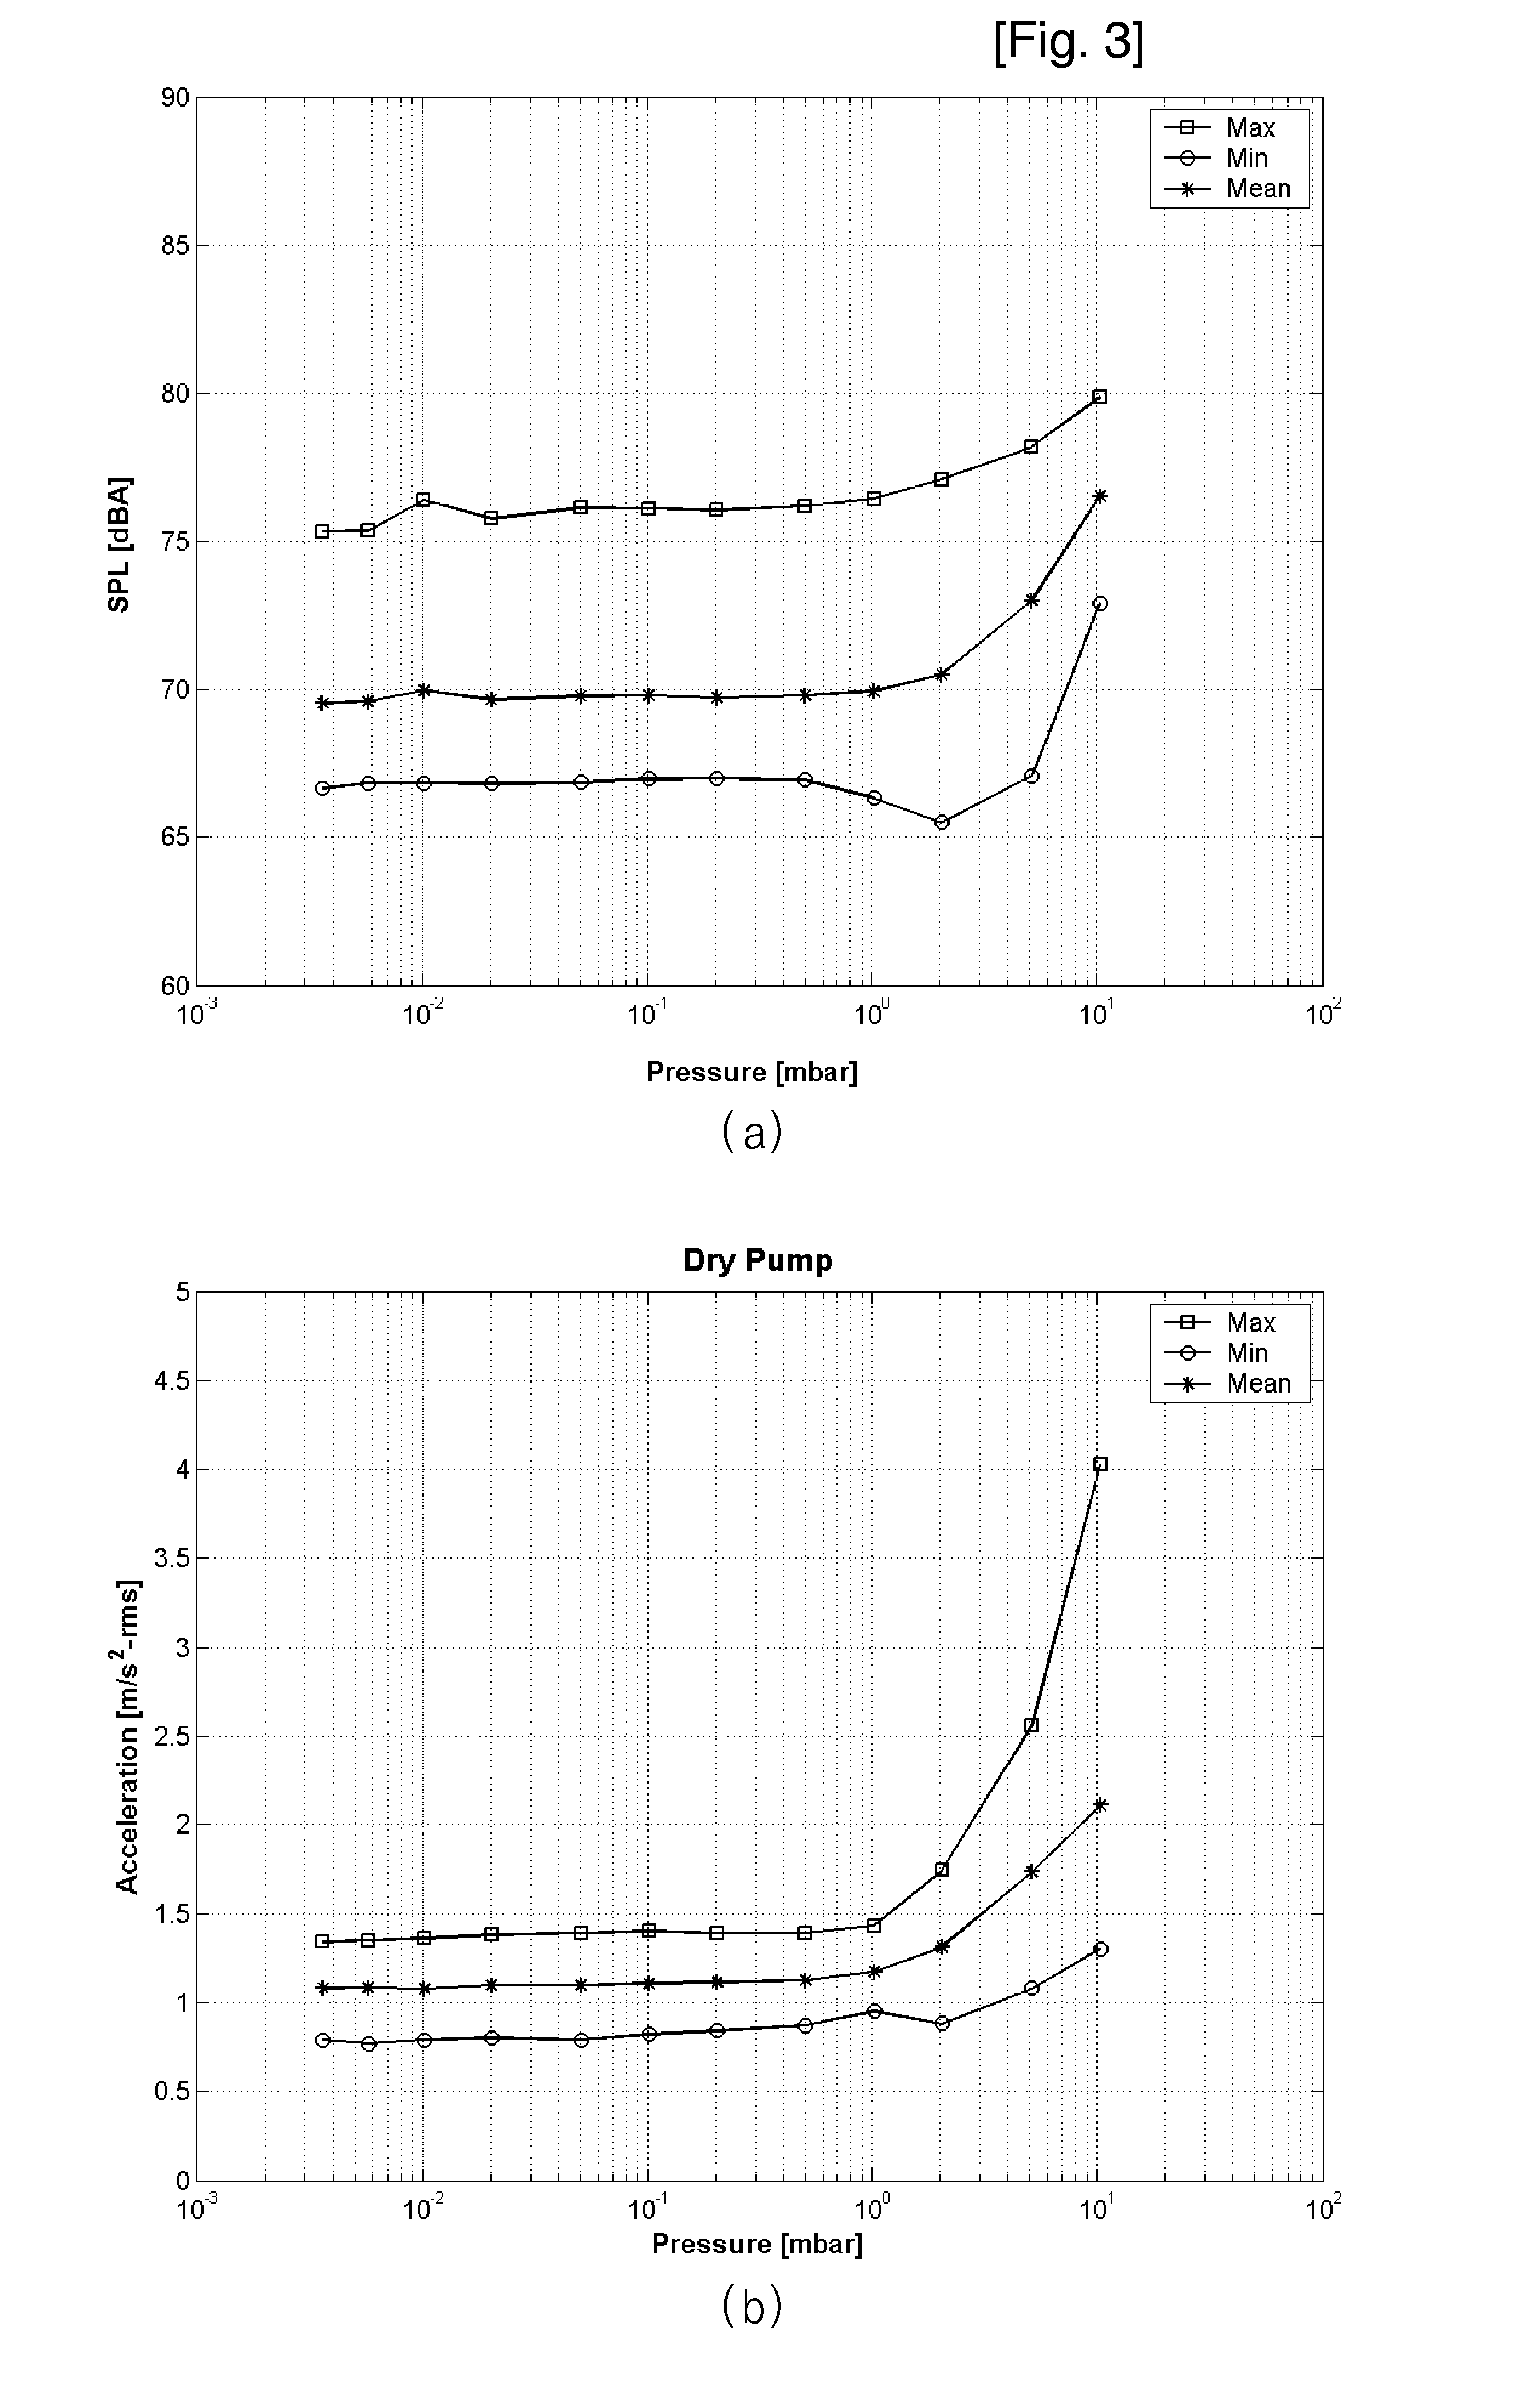 Trend monitoring and diagnostic analysis method and system for failure protection and for predictive maintenance of a vacuum pump